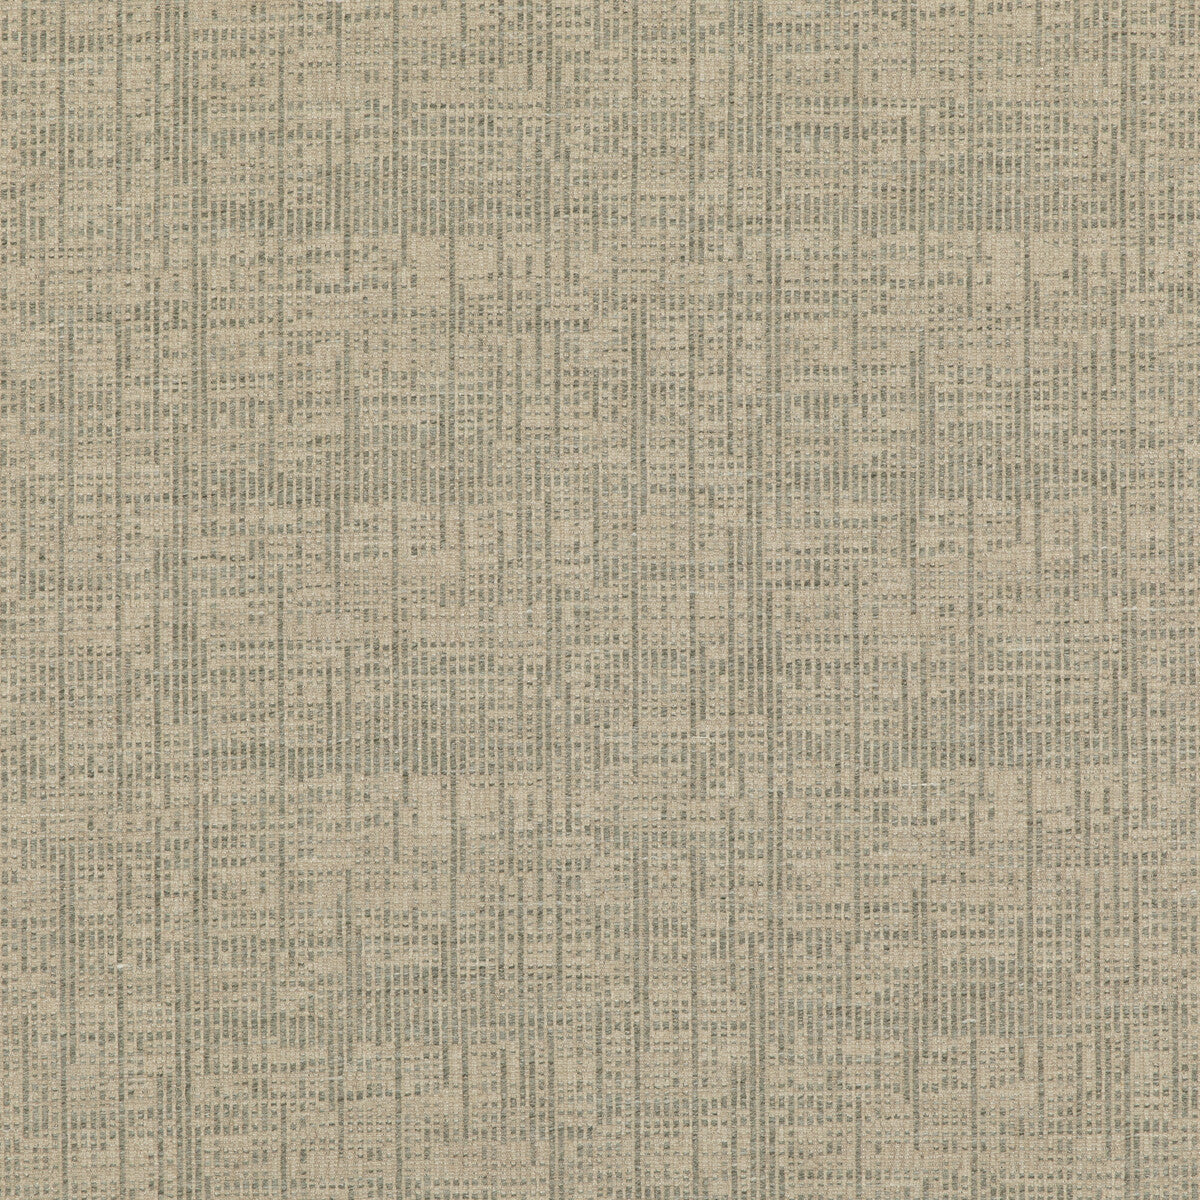 Umbra fabric in mineral color - pattern ED85327.705.0 - by Threads in the Luxury Weaves II collection